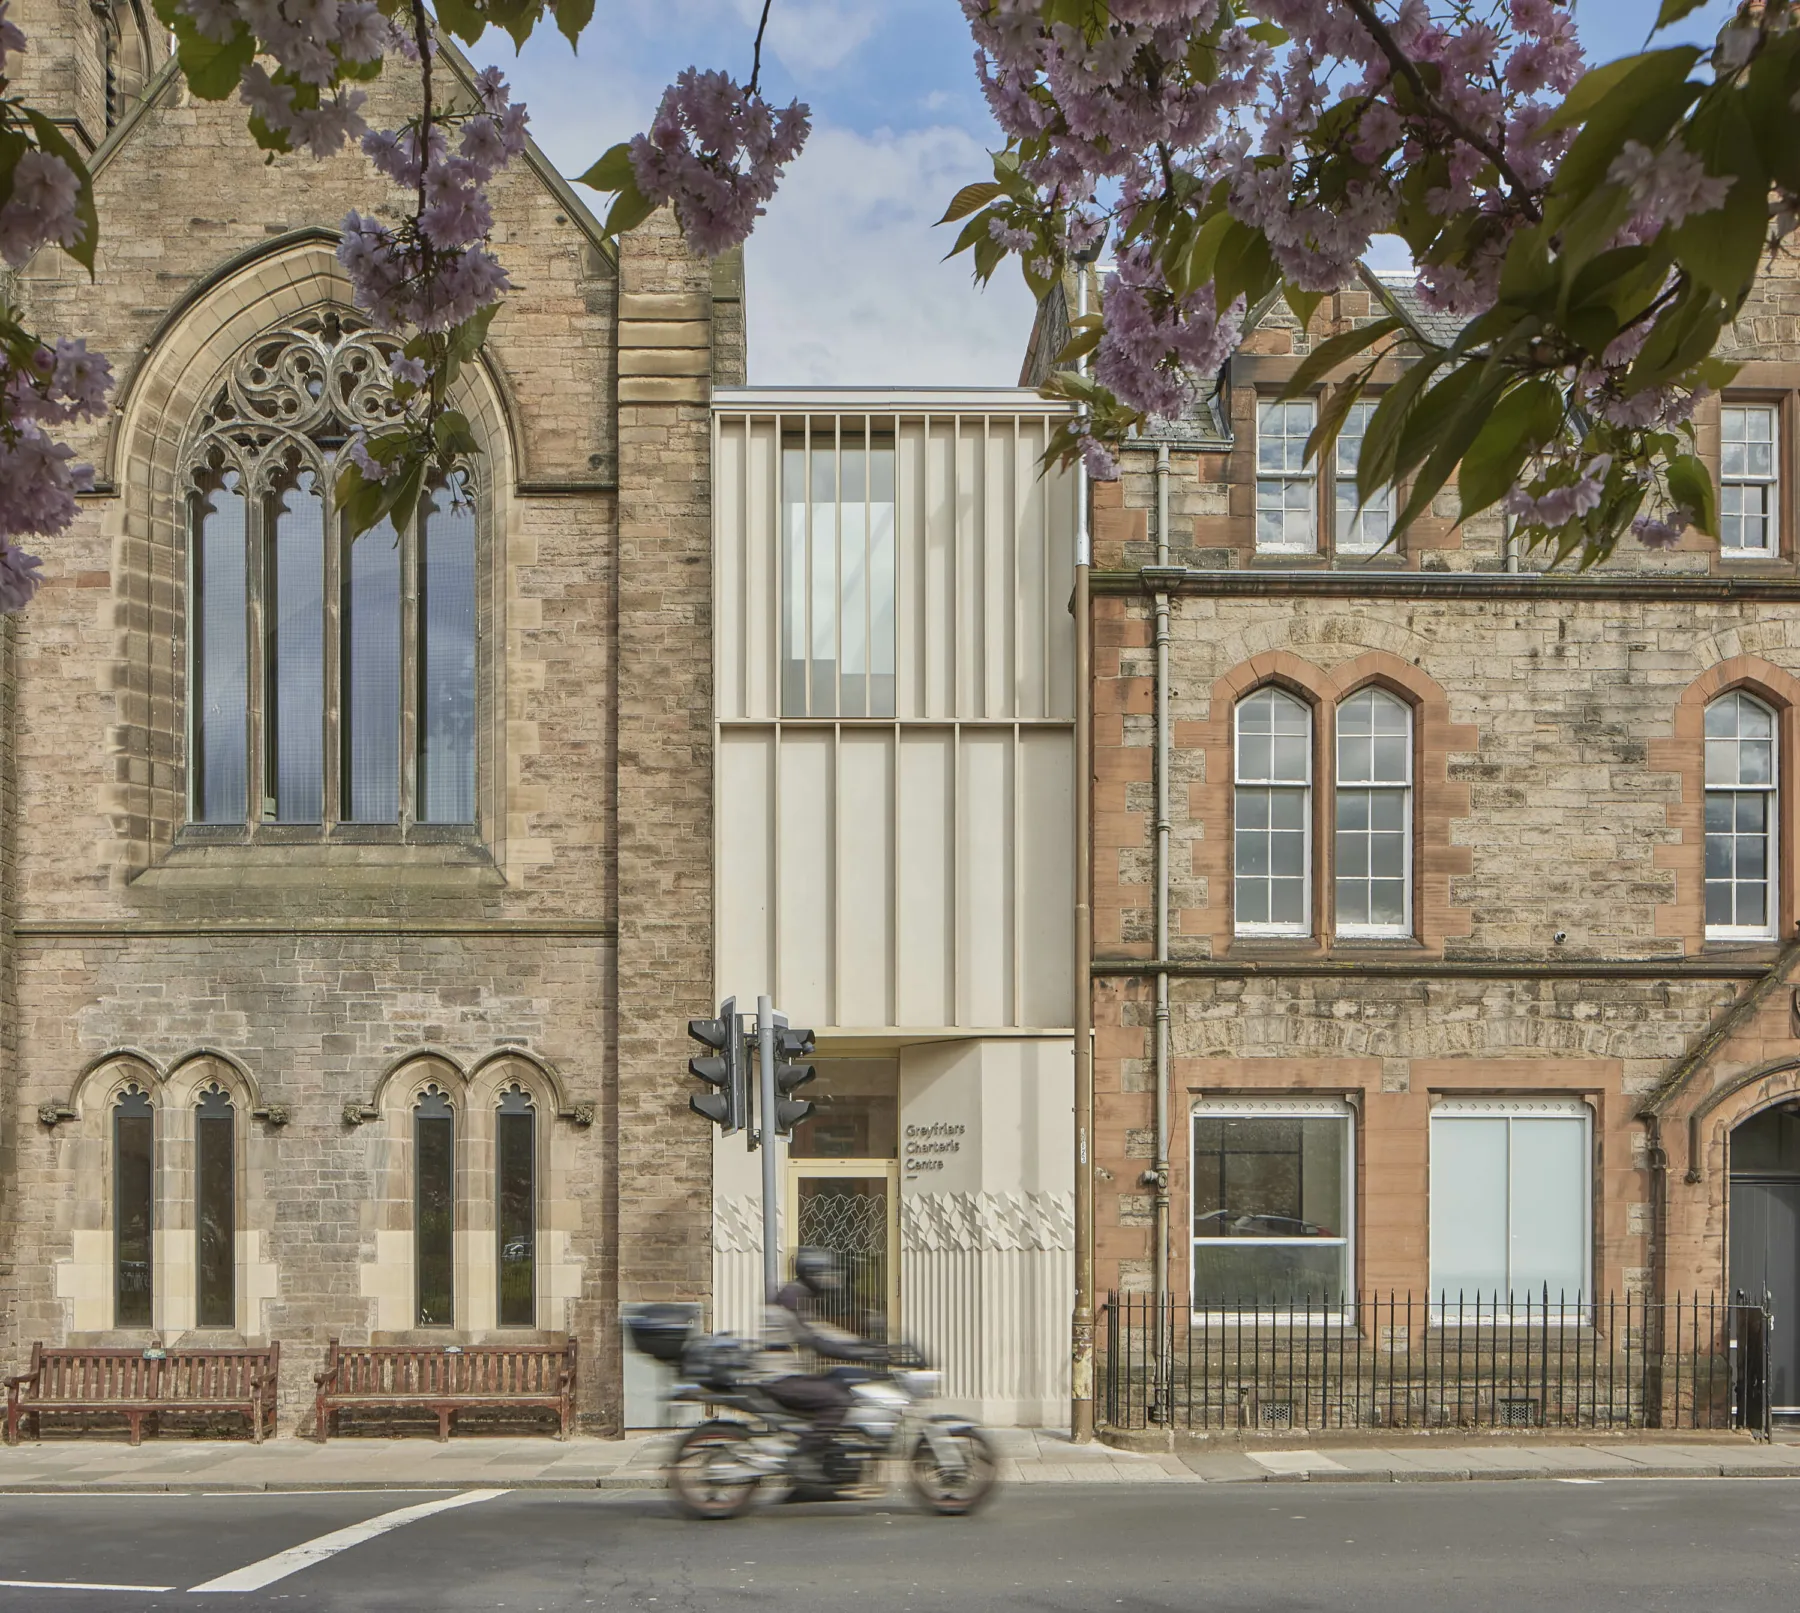 Exterior of the restored and extended buildings at Greyfriars Charteris Centre Edinburgh. A motorcyclist passes the door to the new extension, which is timber clad in terrazzo. The restored church is on the left, with the victorian three storey sandstone office building on the right. Cherry blossom frames the image.